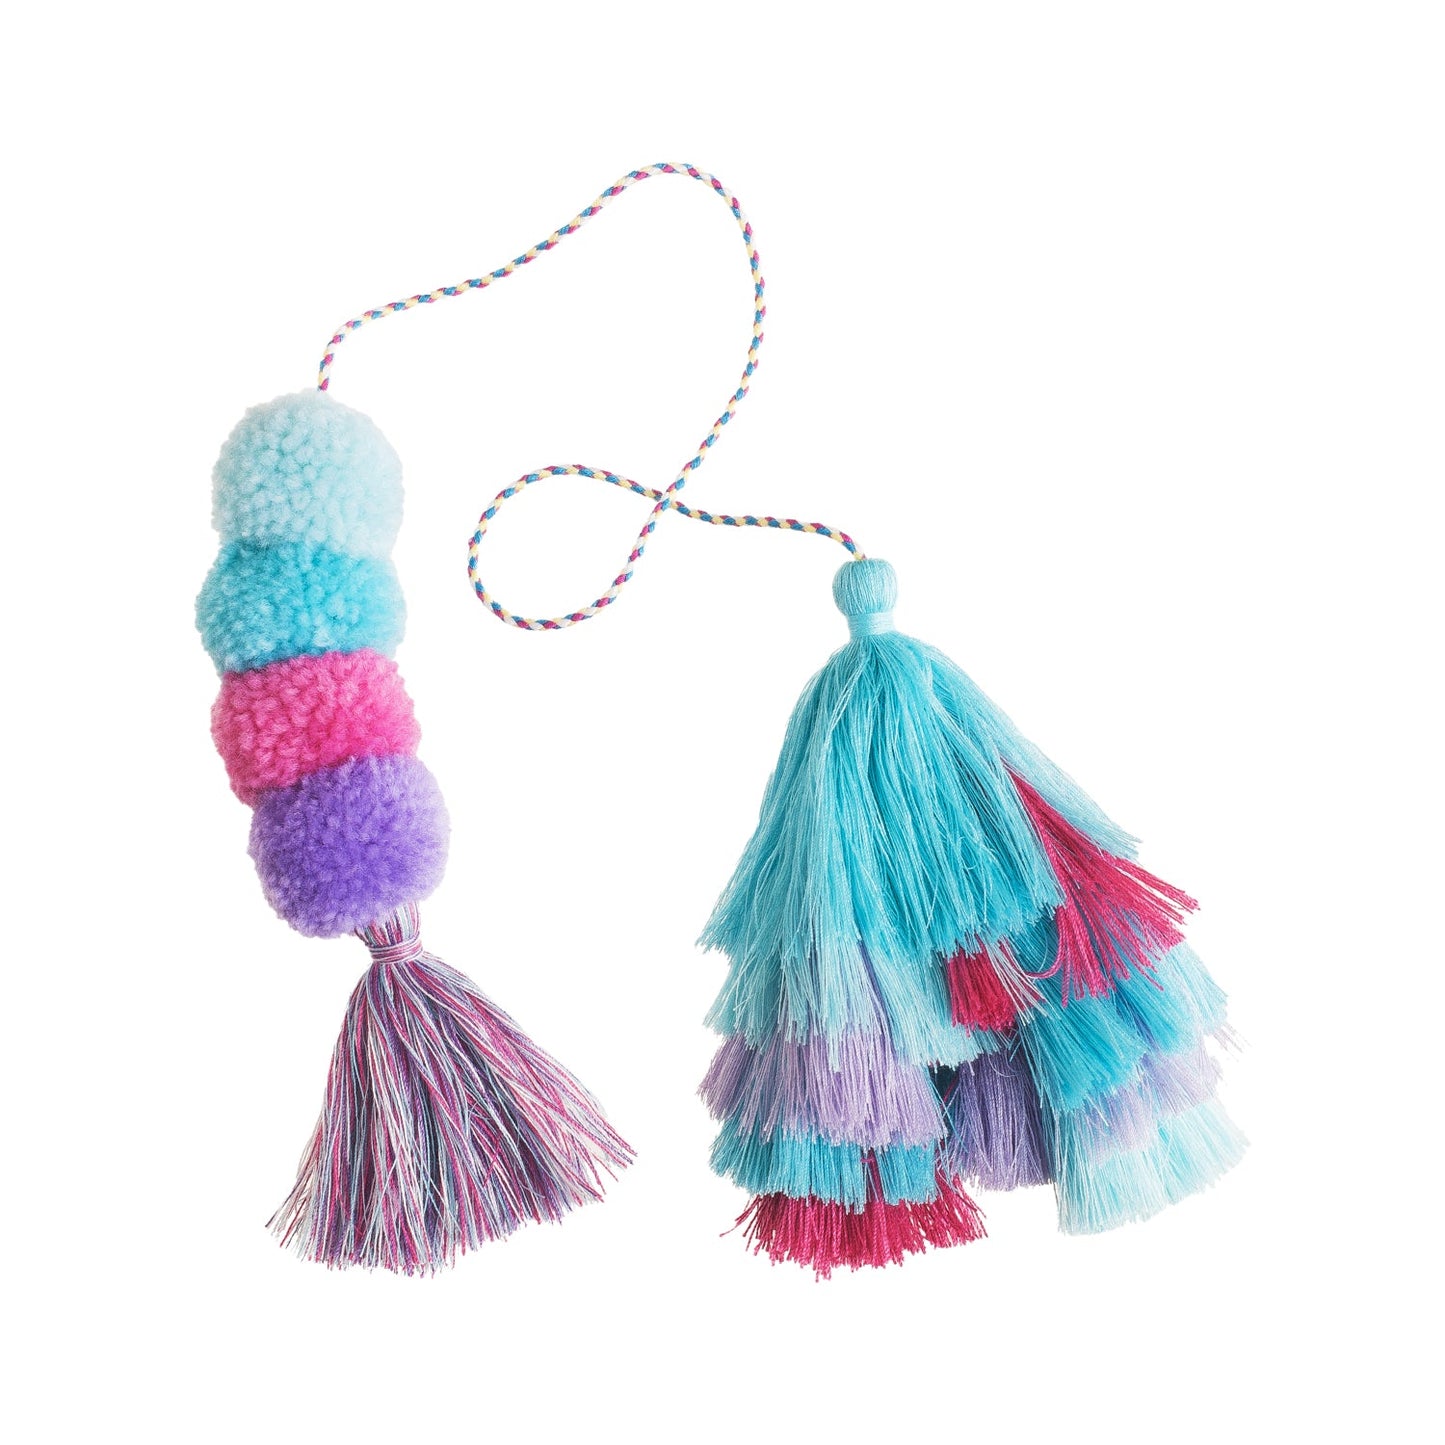 Bogg® Bauble - Cotton Candy